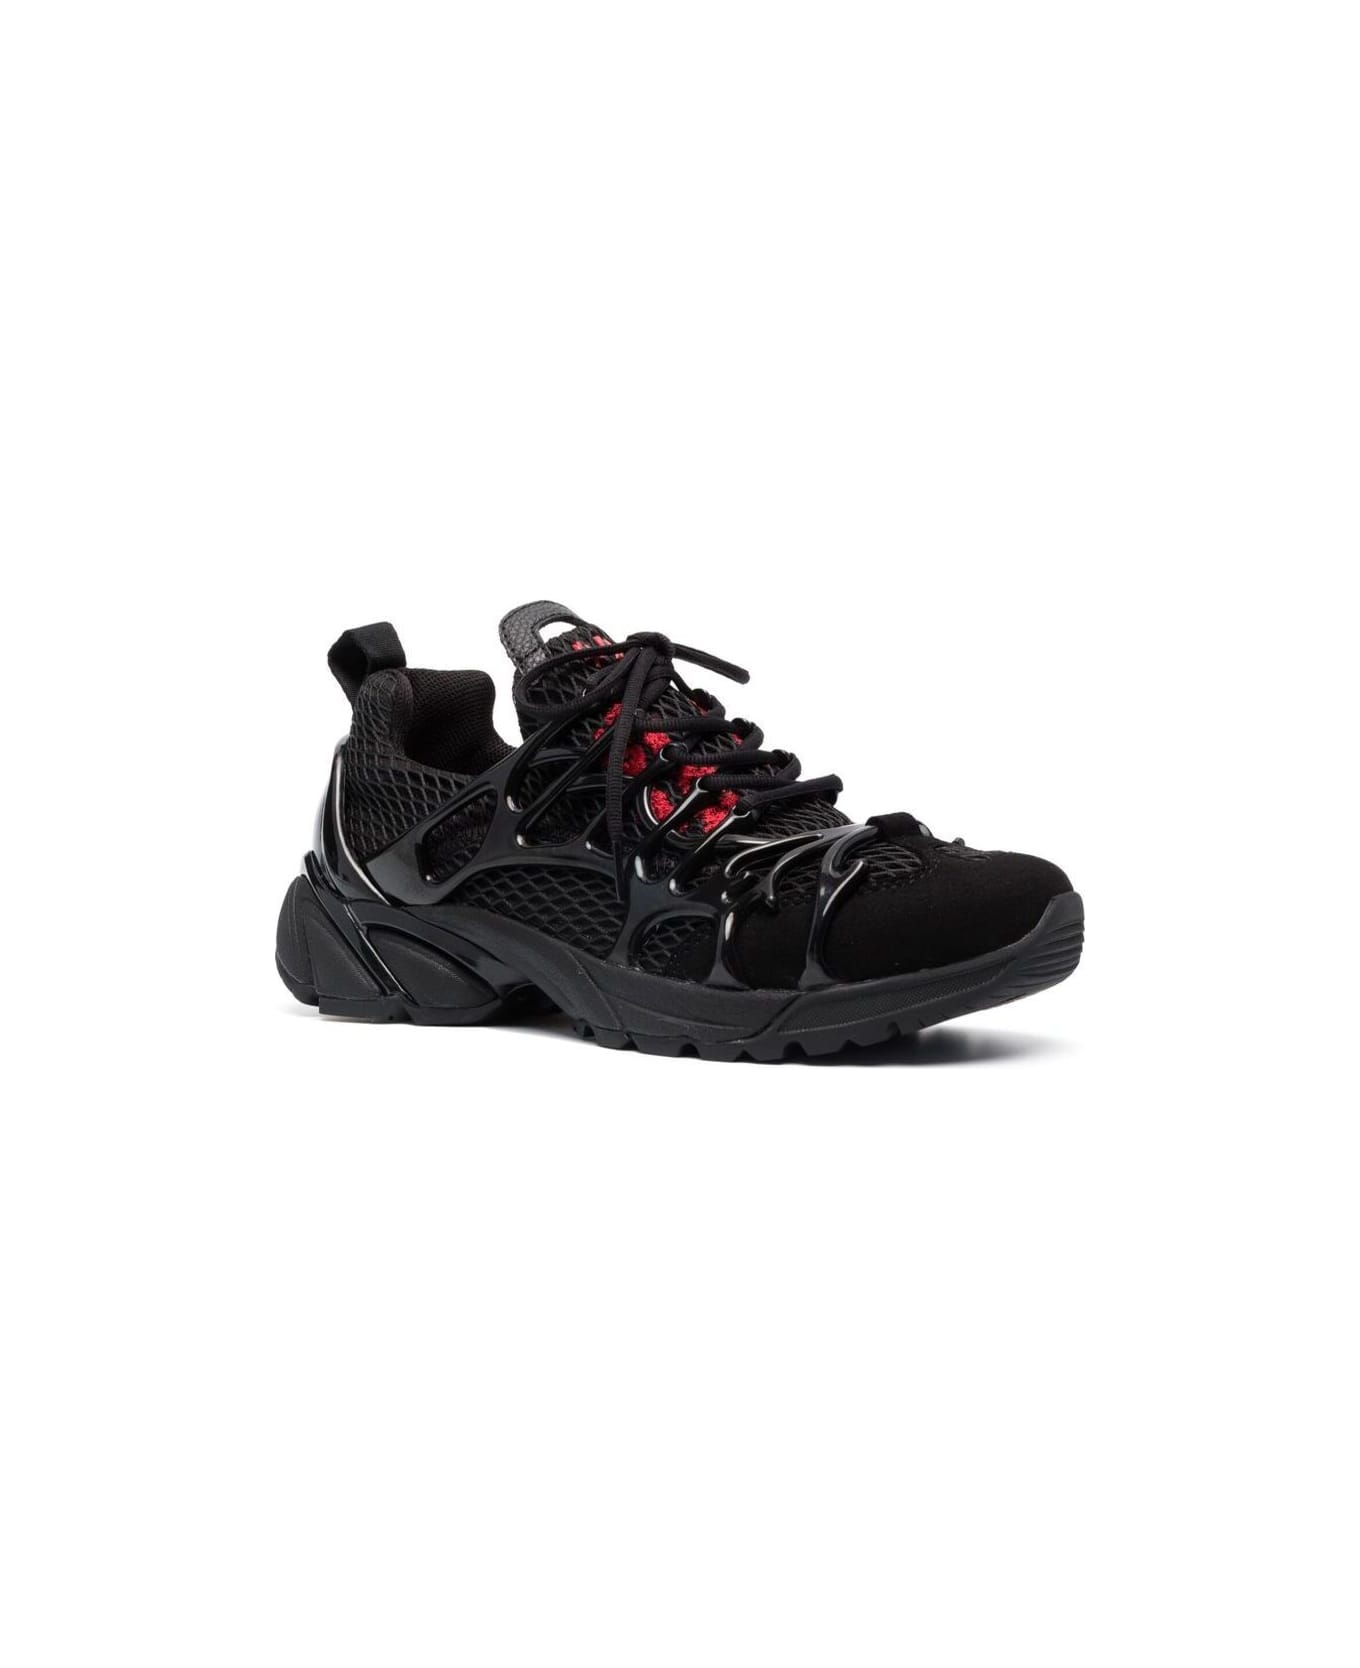 44 Label Group Black Low Top Sneakers With Mesh Panelling In Polyamide Man 44 Label Group - Black